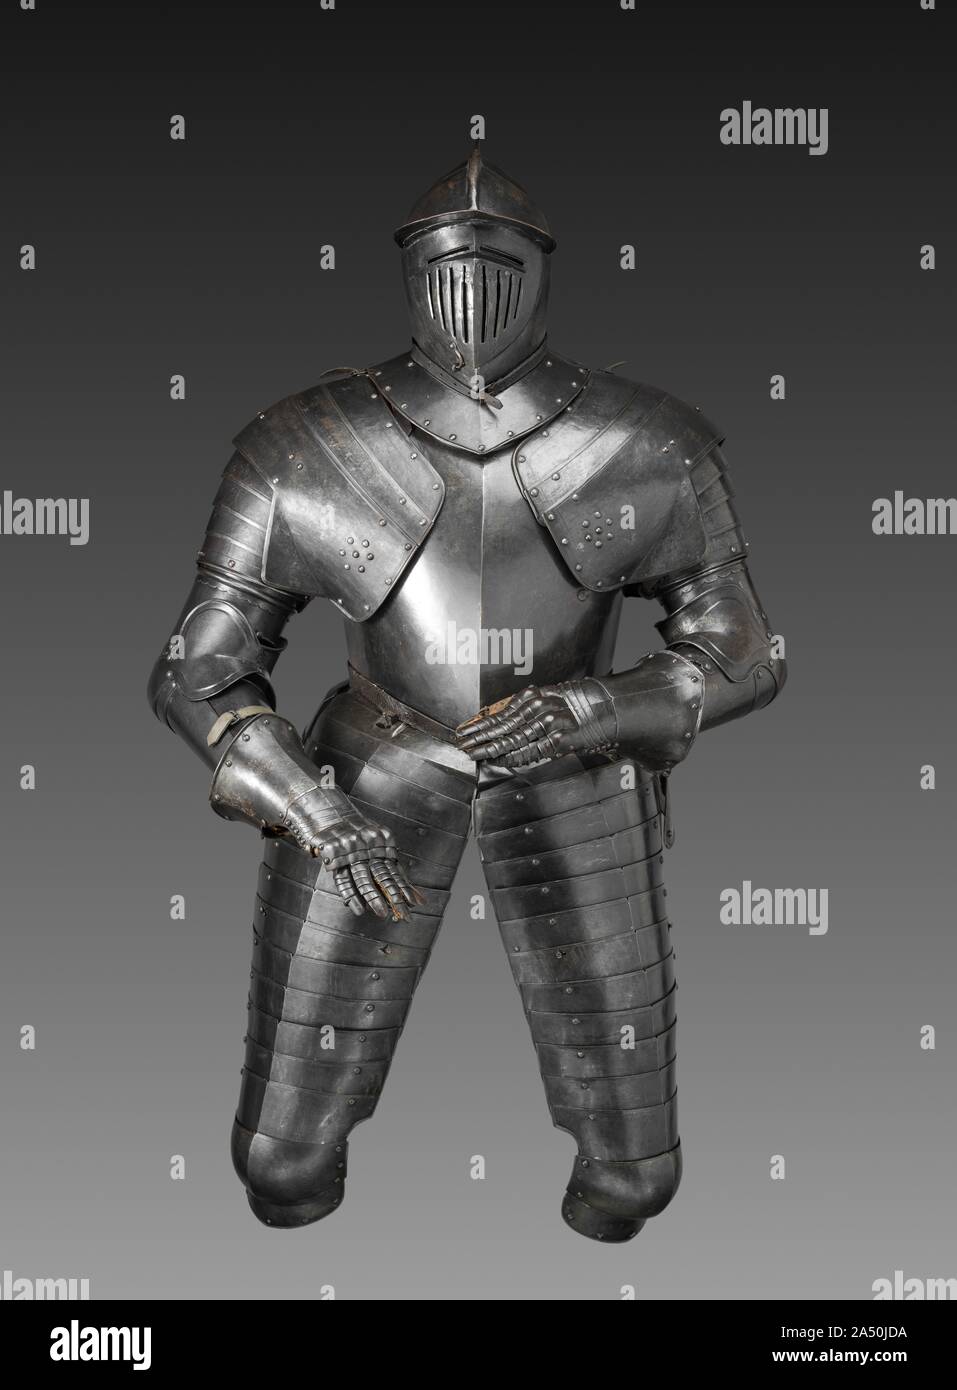 Cuirassier's Armor, c. 1600-1620. The cuirassier was the heavy cavalryman of the late 1500s and early 1600s. Carrying pistols and a sword, he was clad in full armor, like this suit, with the exception of his lower legs, which were protected by heavy riding boots. Shortly after 1650, such heavy cavalry armor disappeared from use. By then, European cavalries had abandoned full armor as impractical against the increased sophistication of firearms. Similar armors survive in the Armory of Graz, Austria. Stock Photo